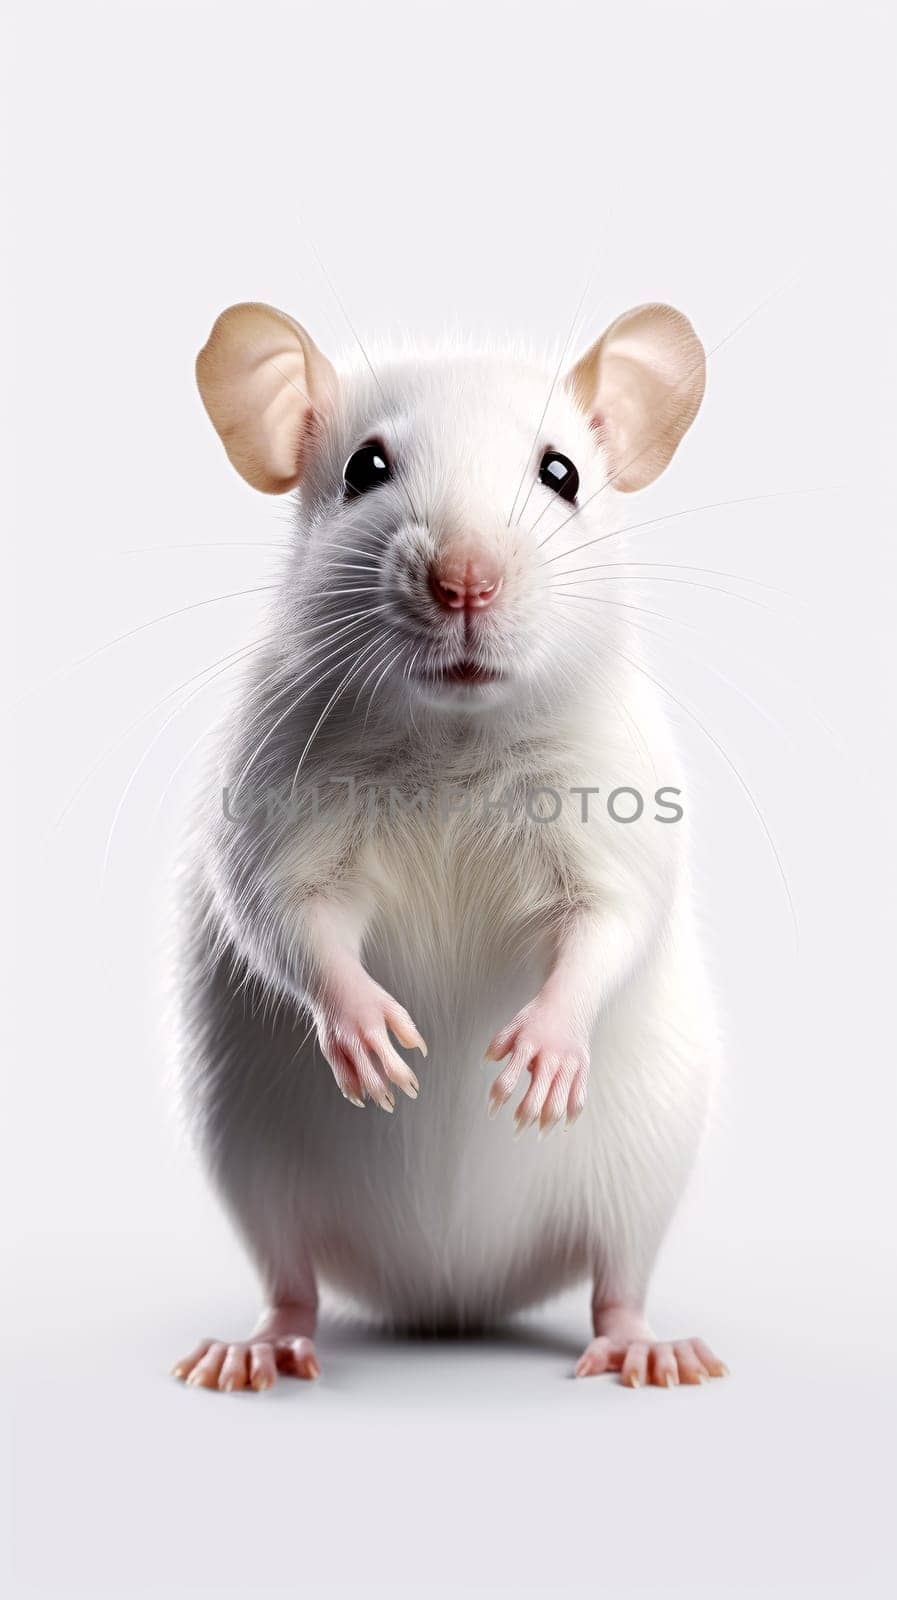 A cute cartoon white rat on white background by chrisroll